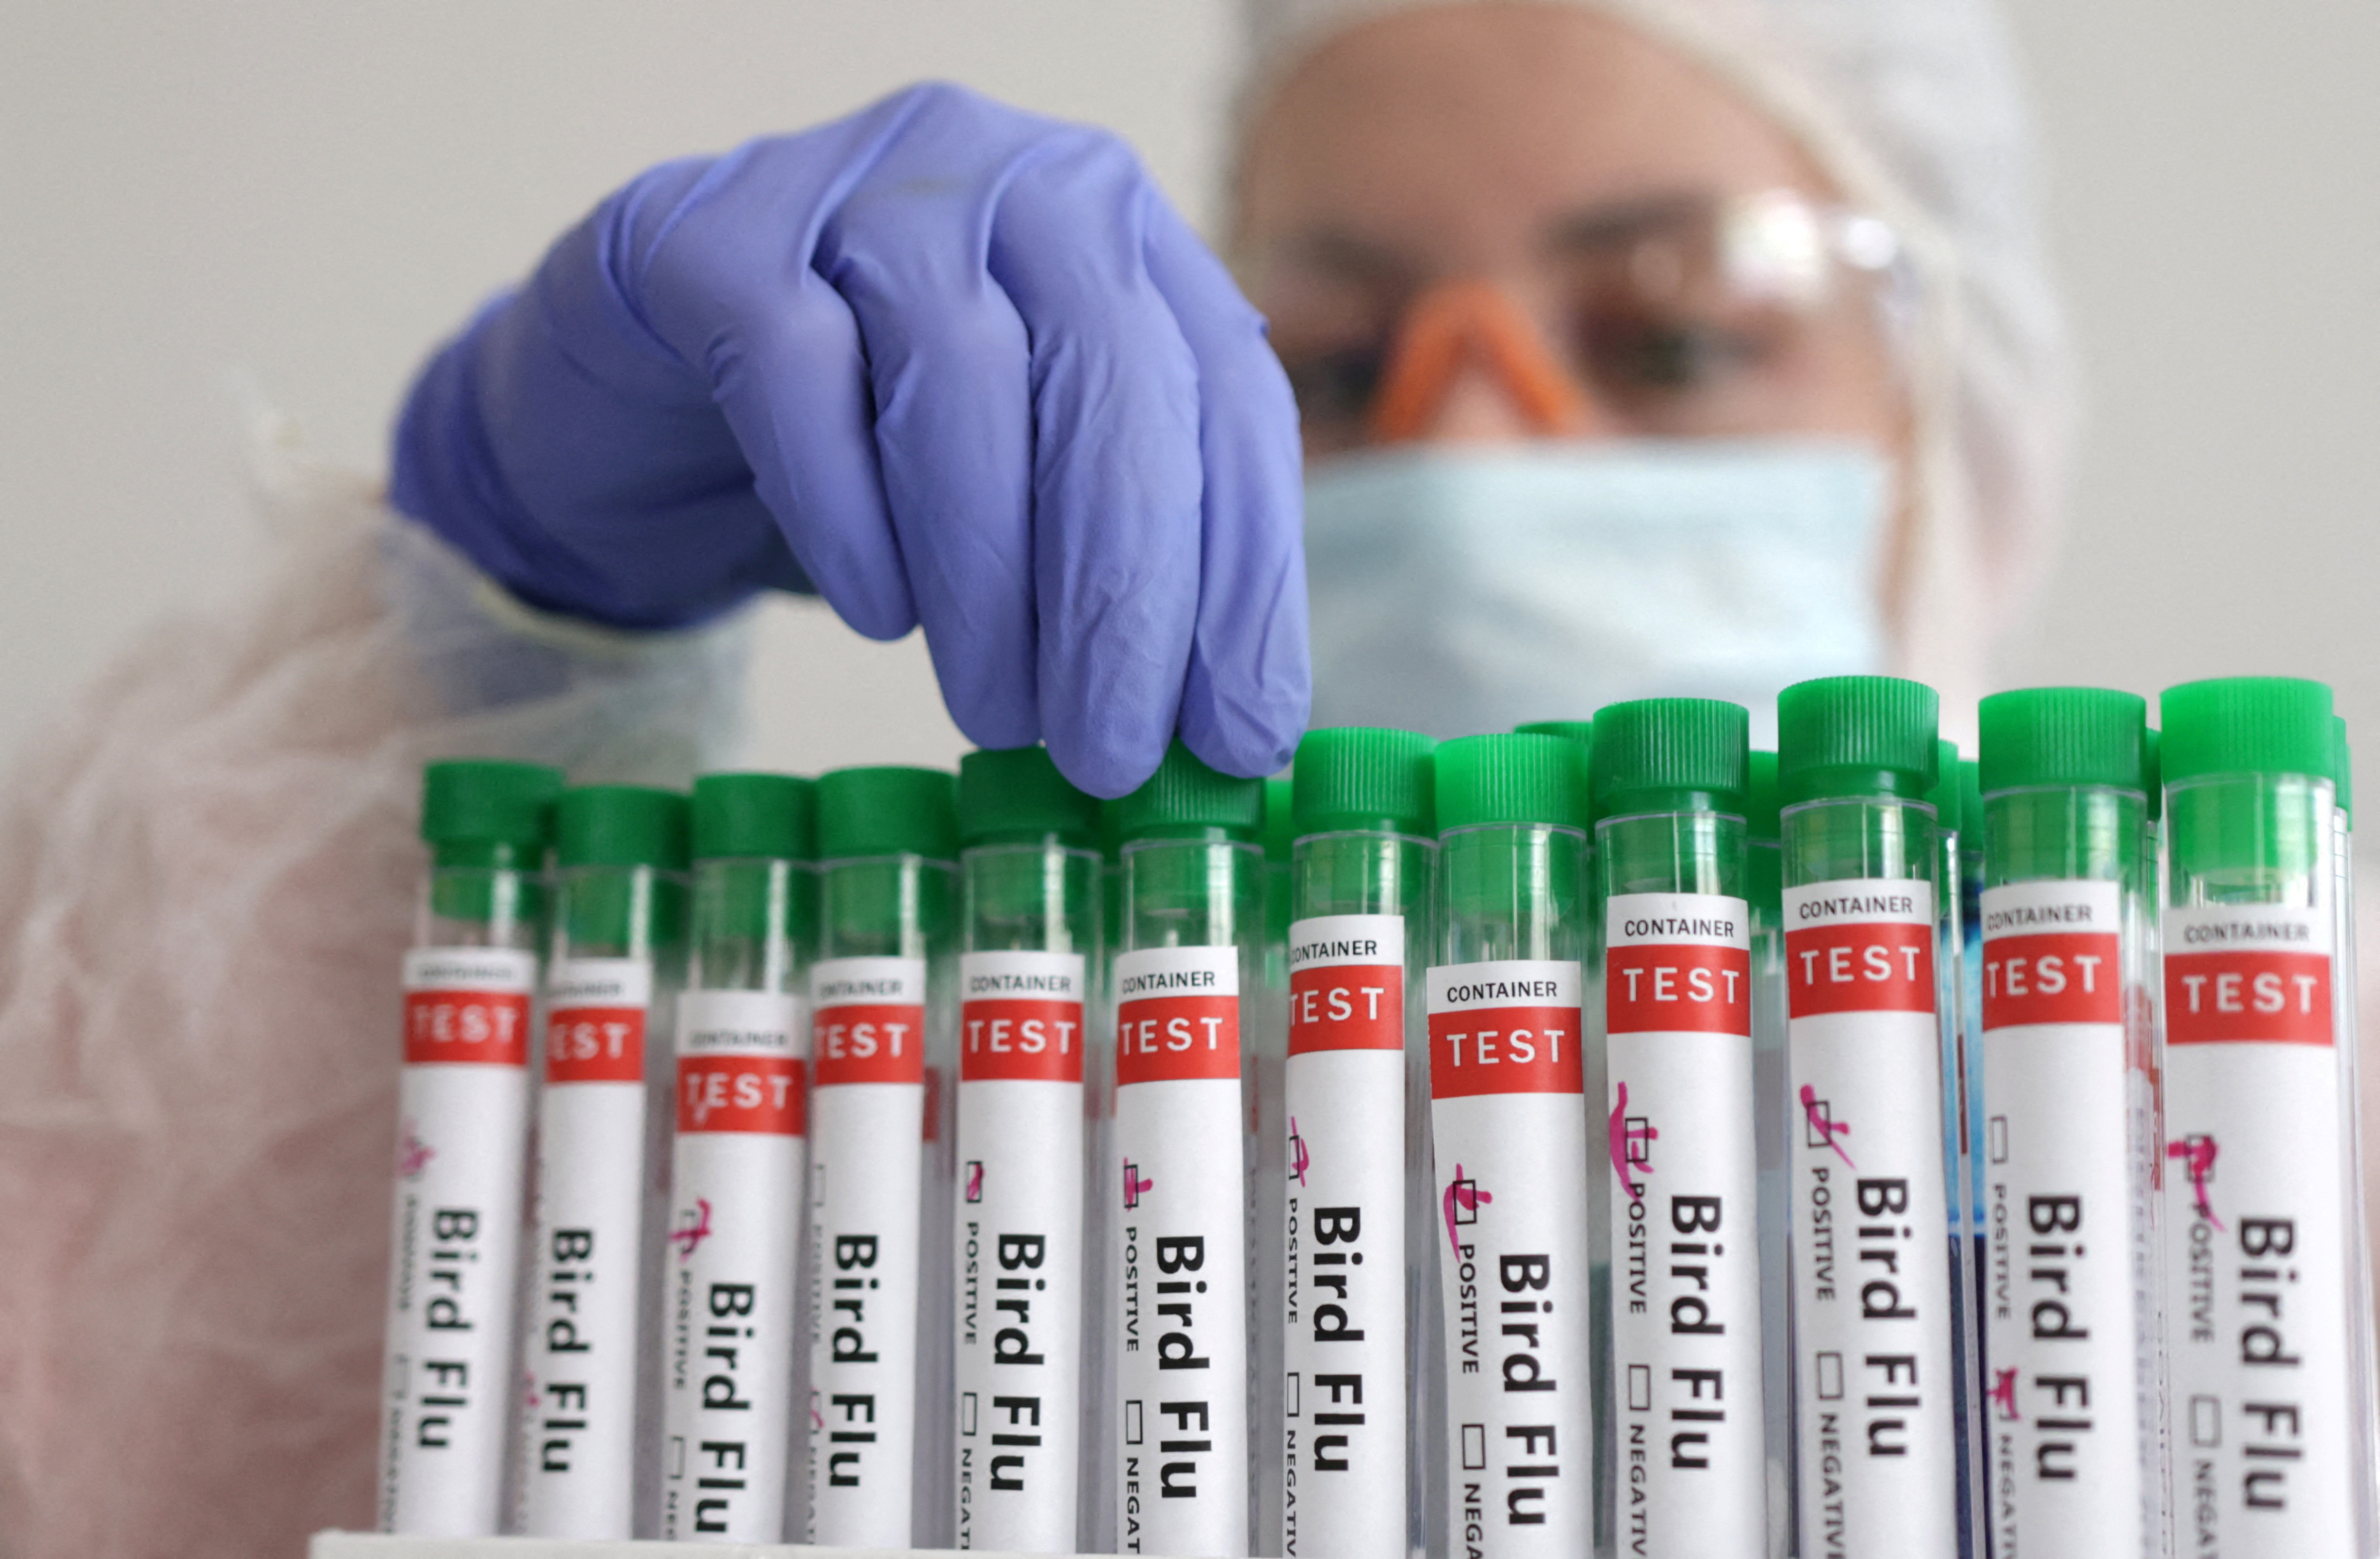 Illustration shows person touching test tube labelled "Bird Flu\